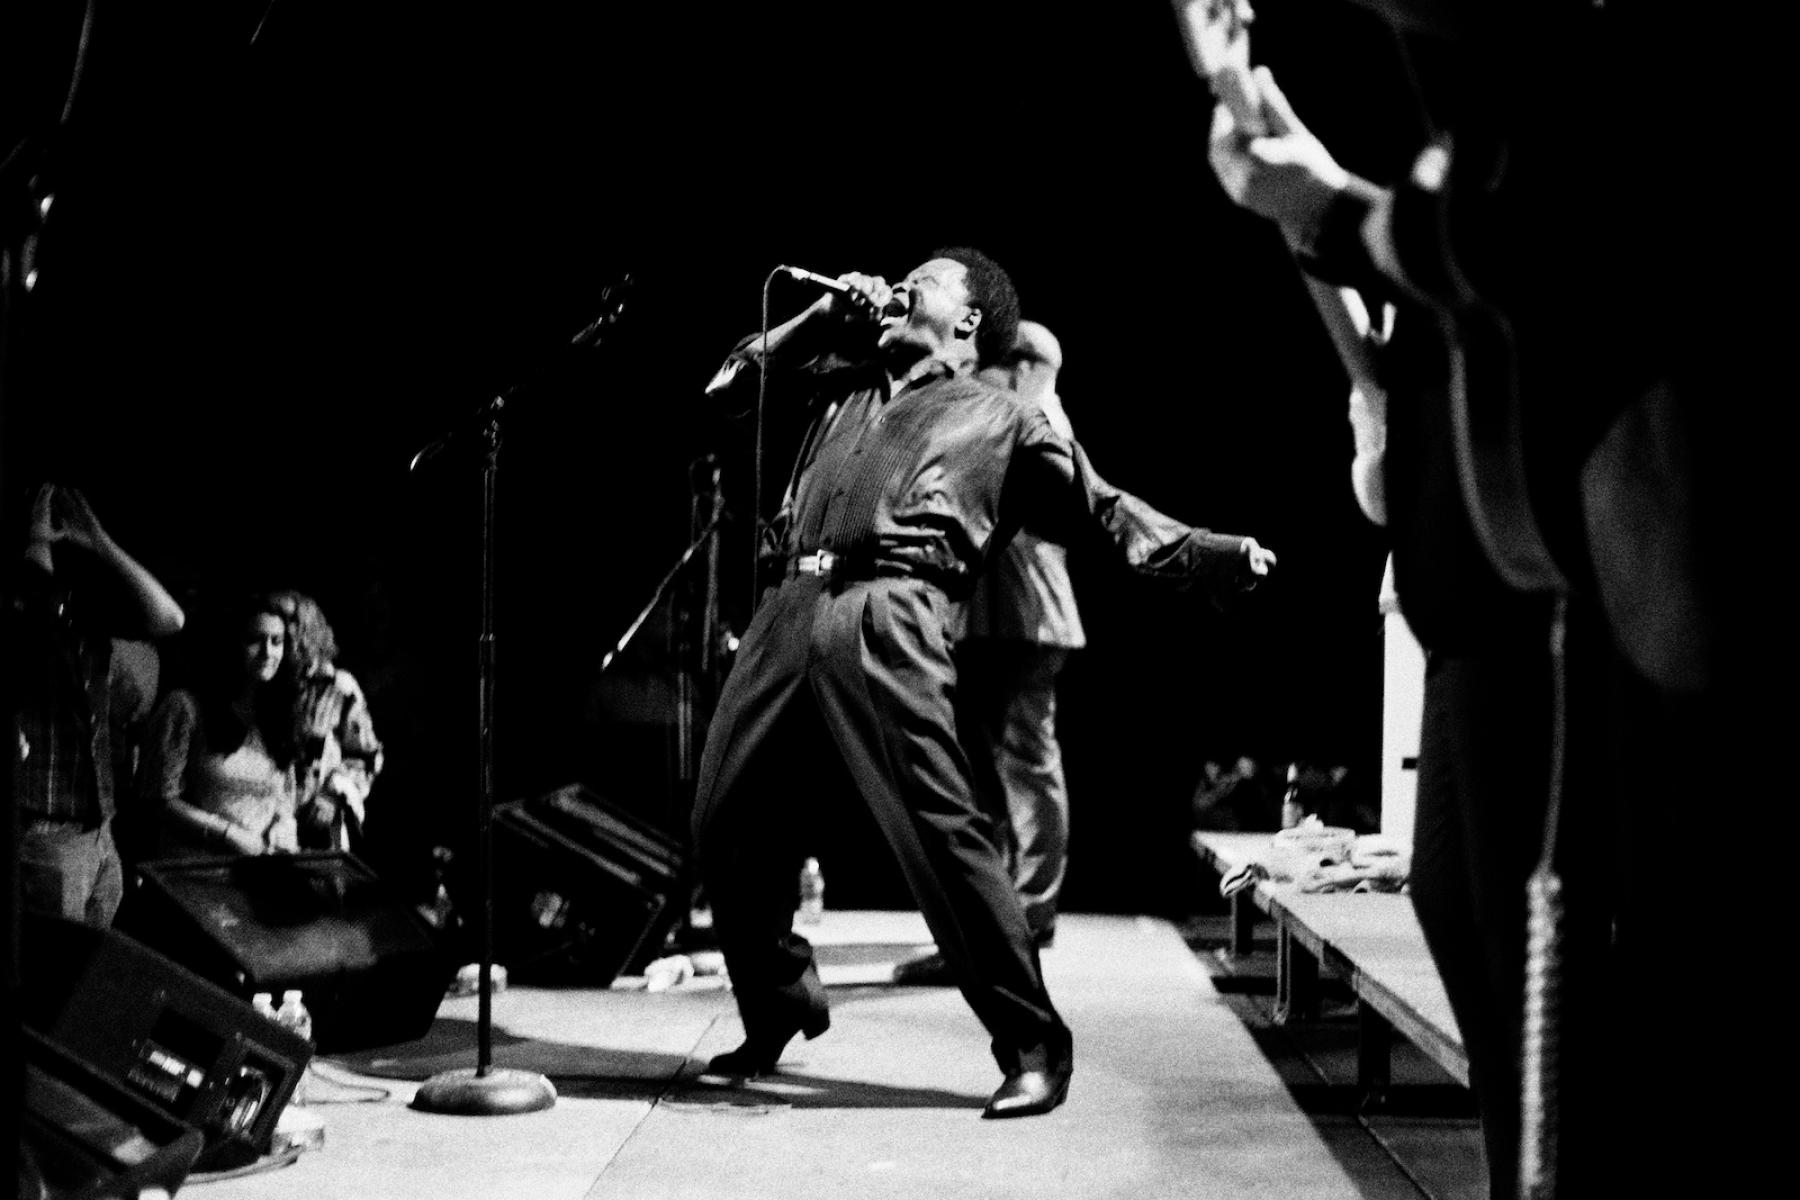 Lee Fields and the Expressions, 12 October 2012. Photo by Robert Pecina, Jr.